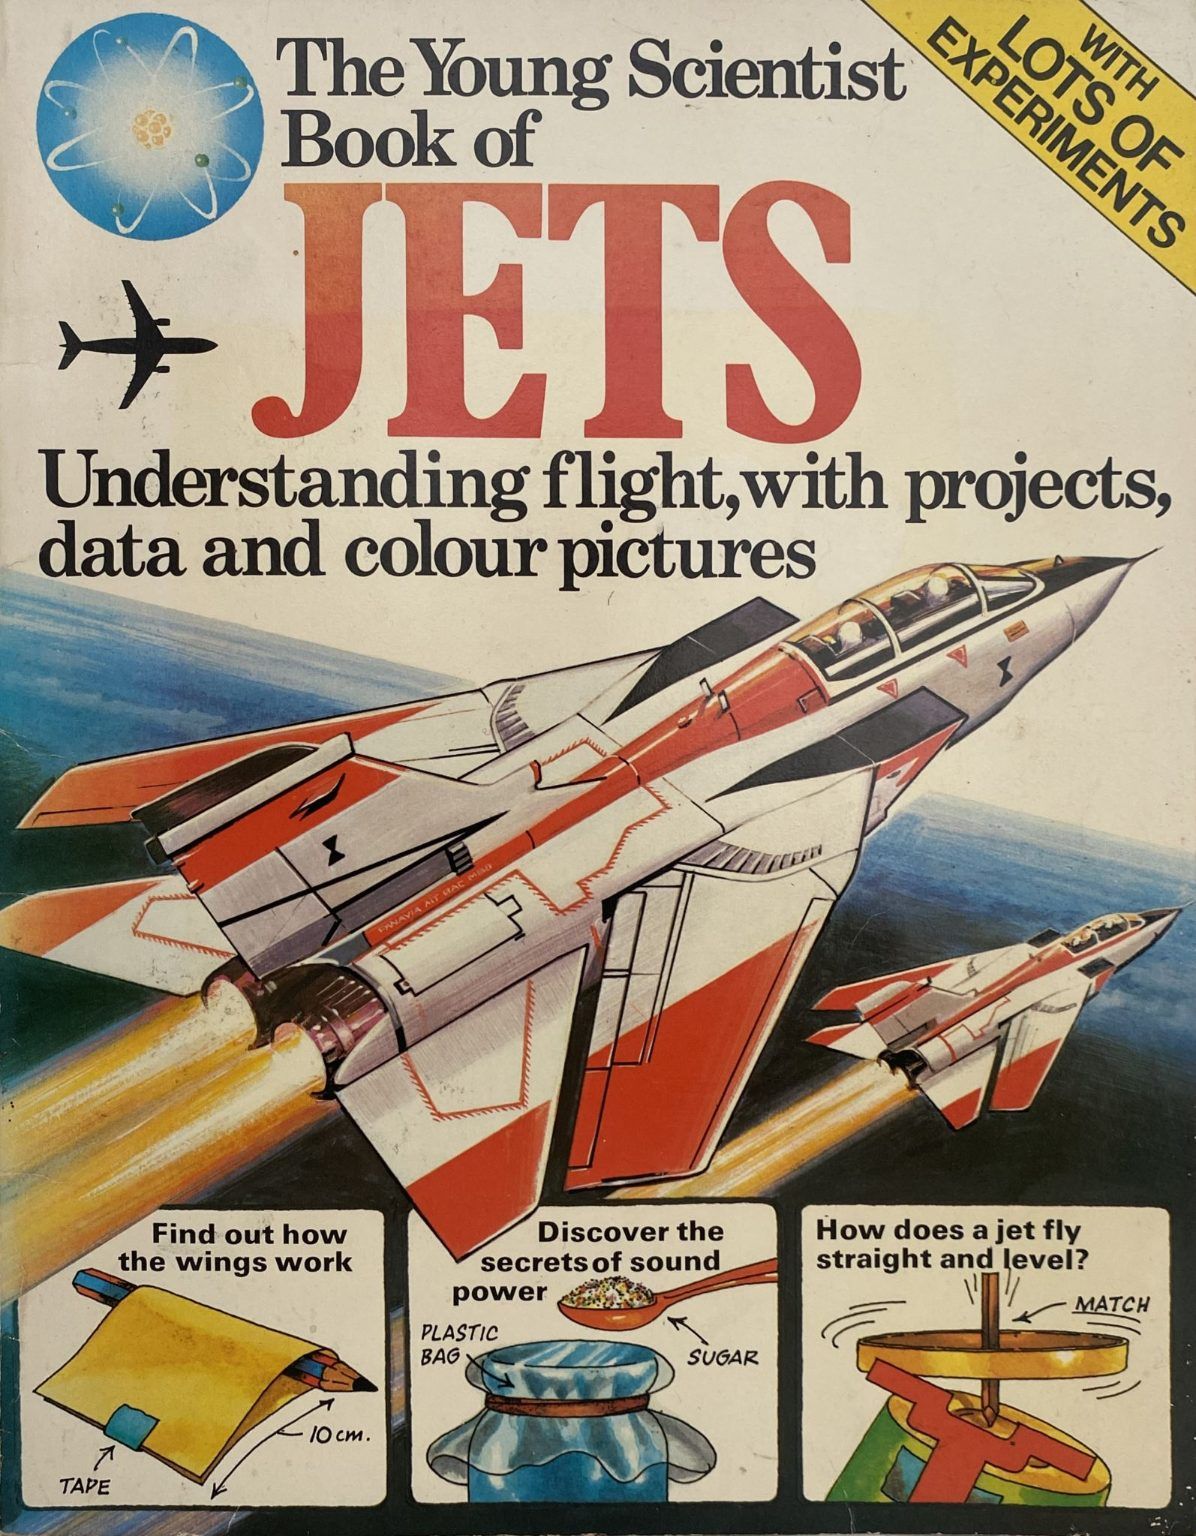 JETS: The Young Scientist Series